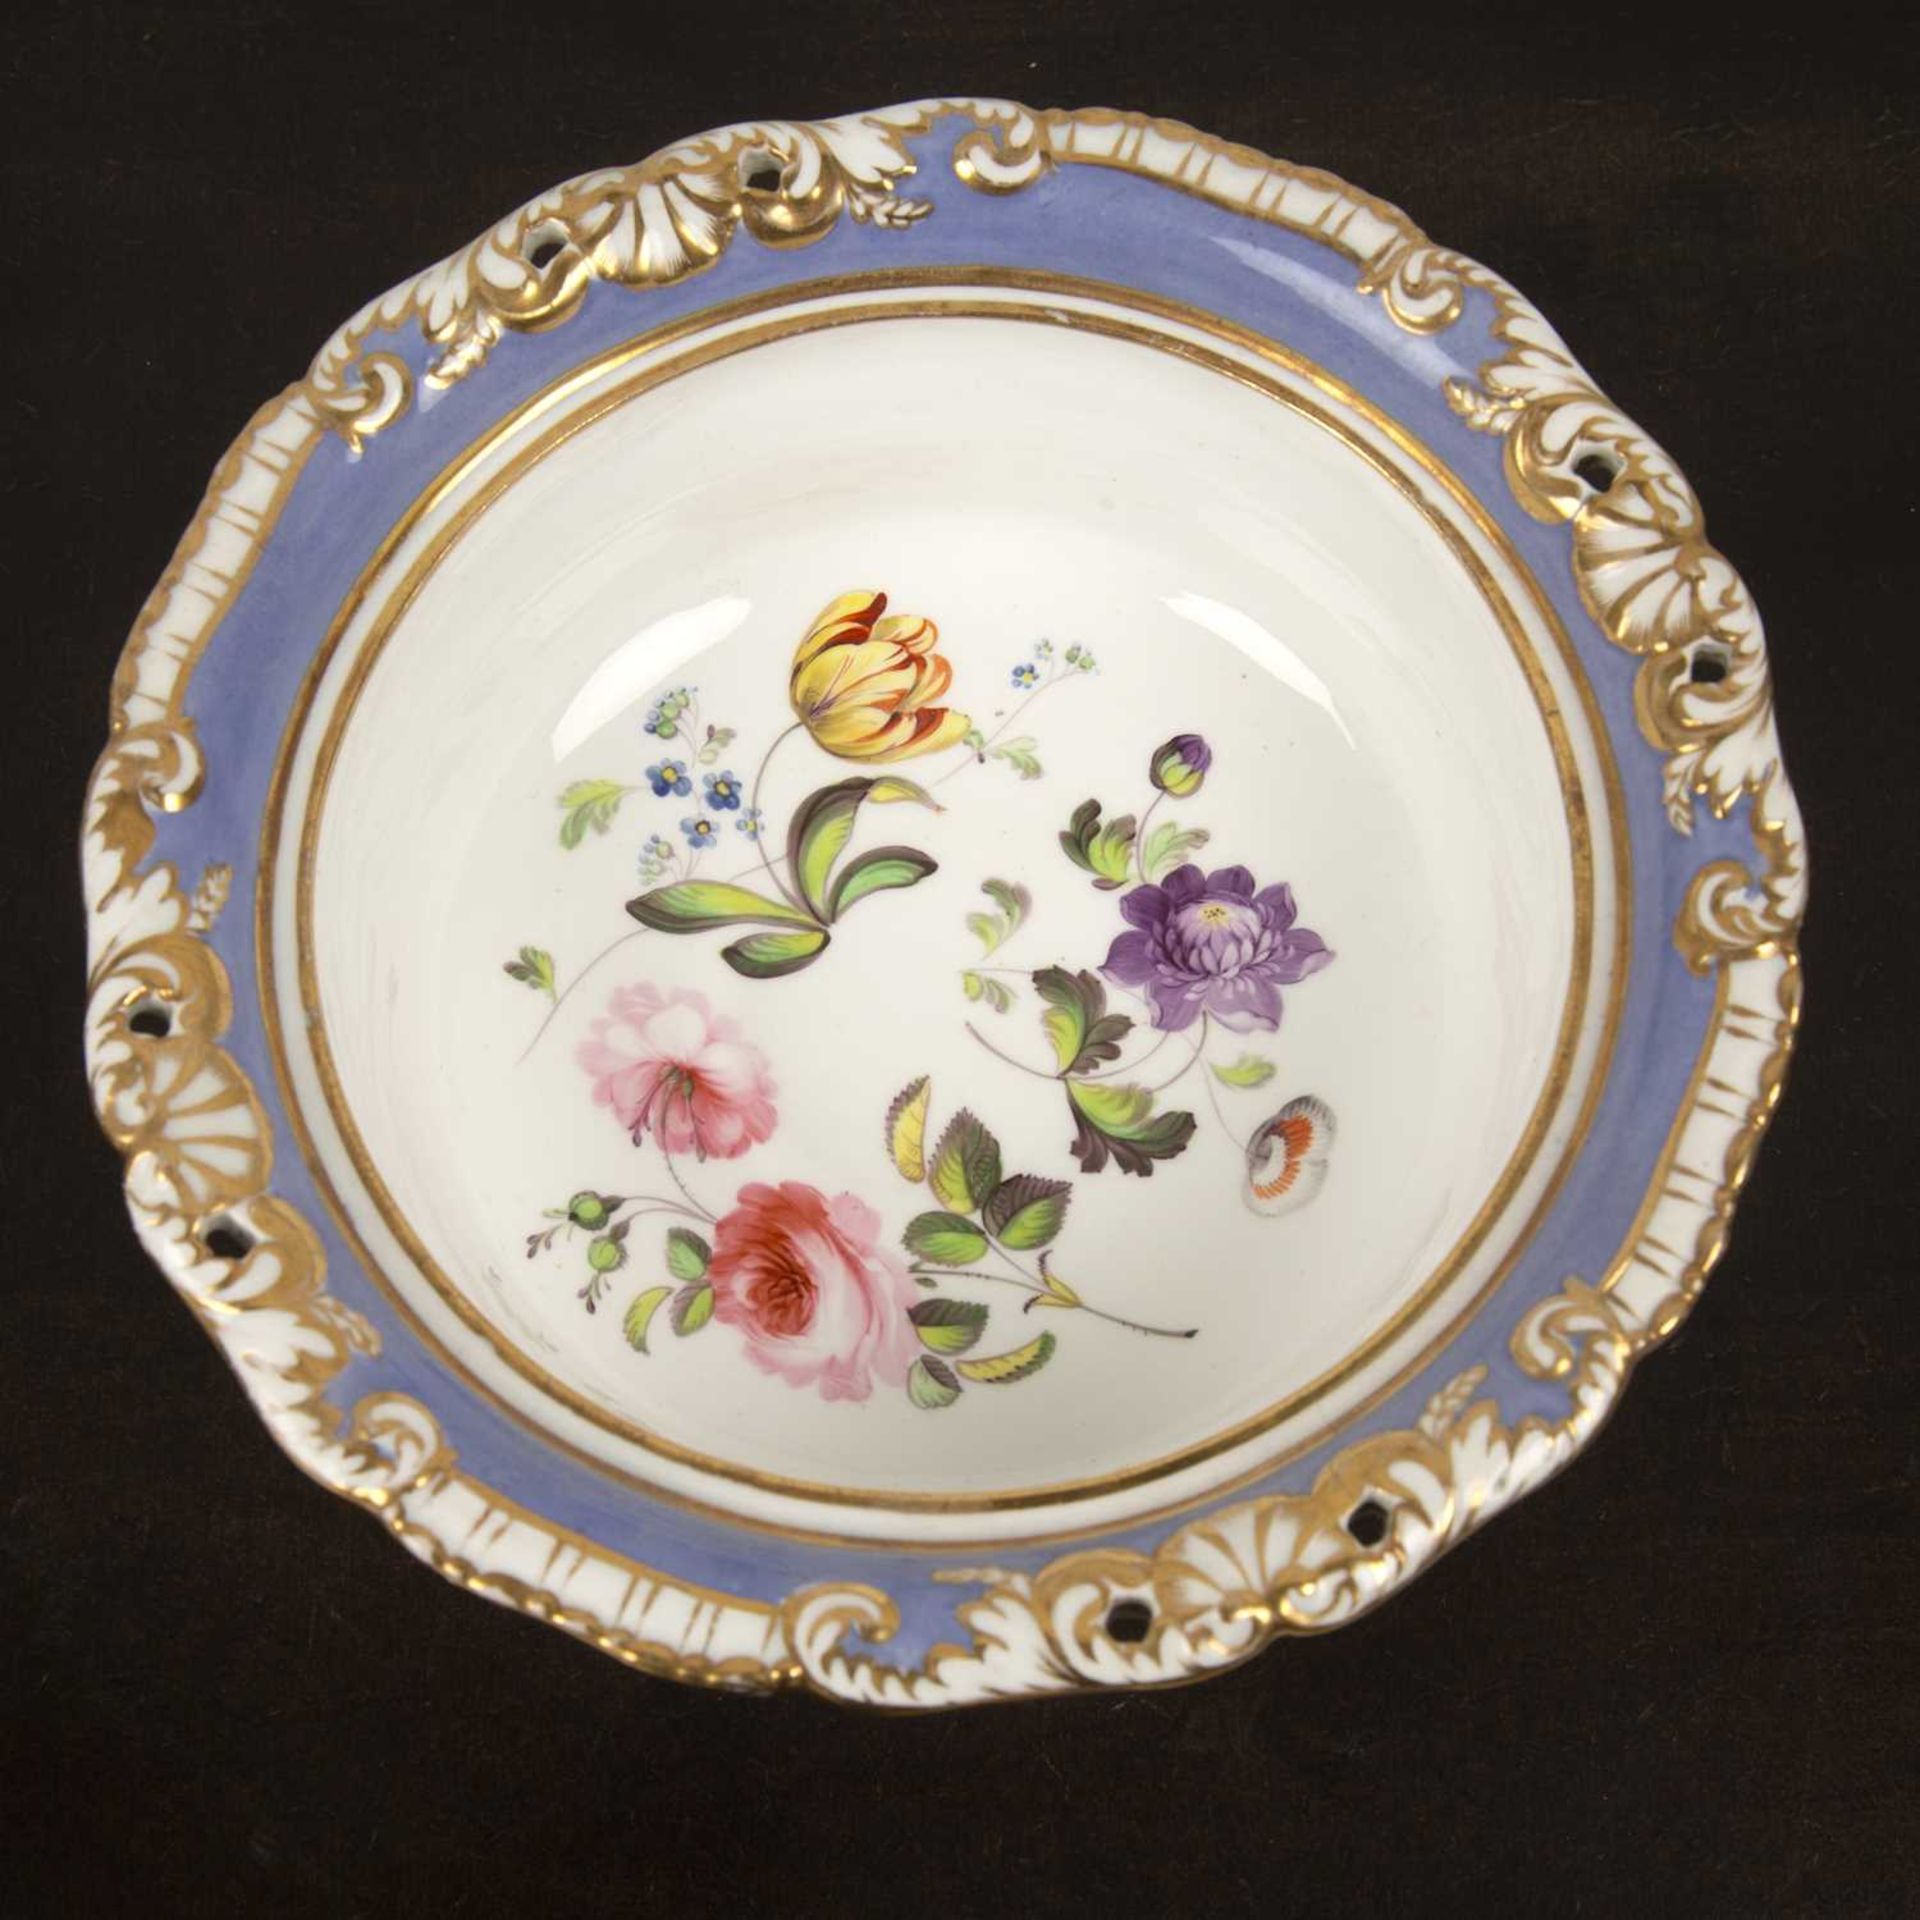 H and R Daniel part porcelain service circa 1830/1840, painted with flower sprays, within pale - Image 3 of 4